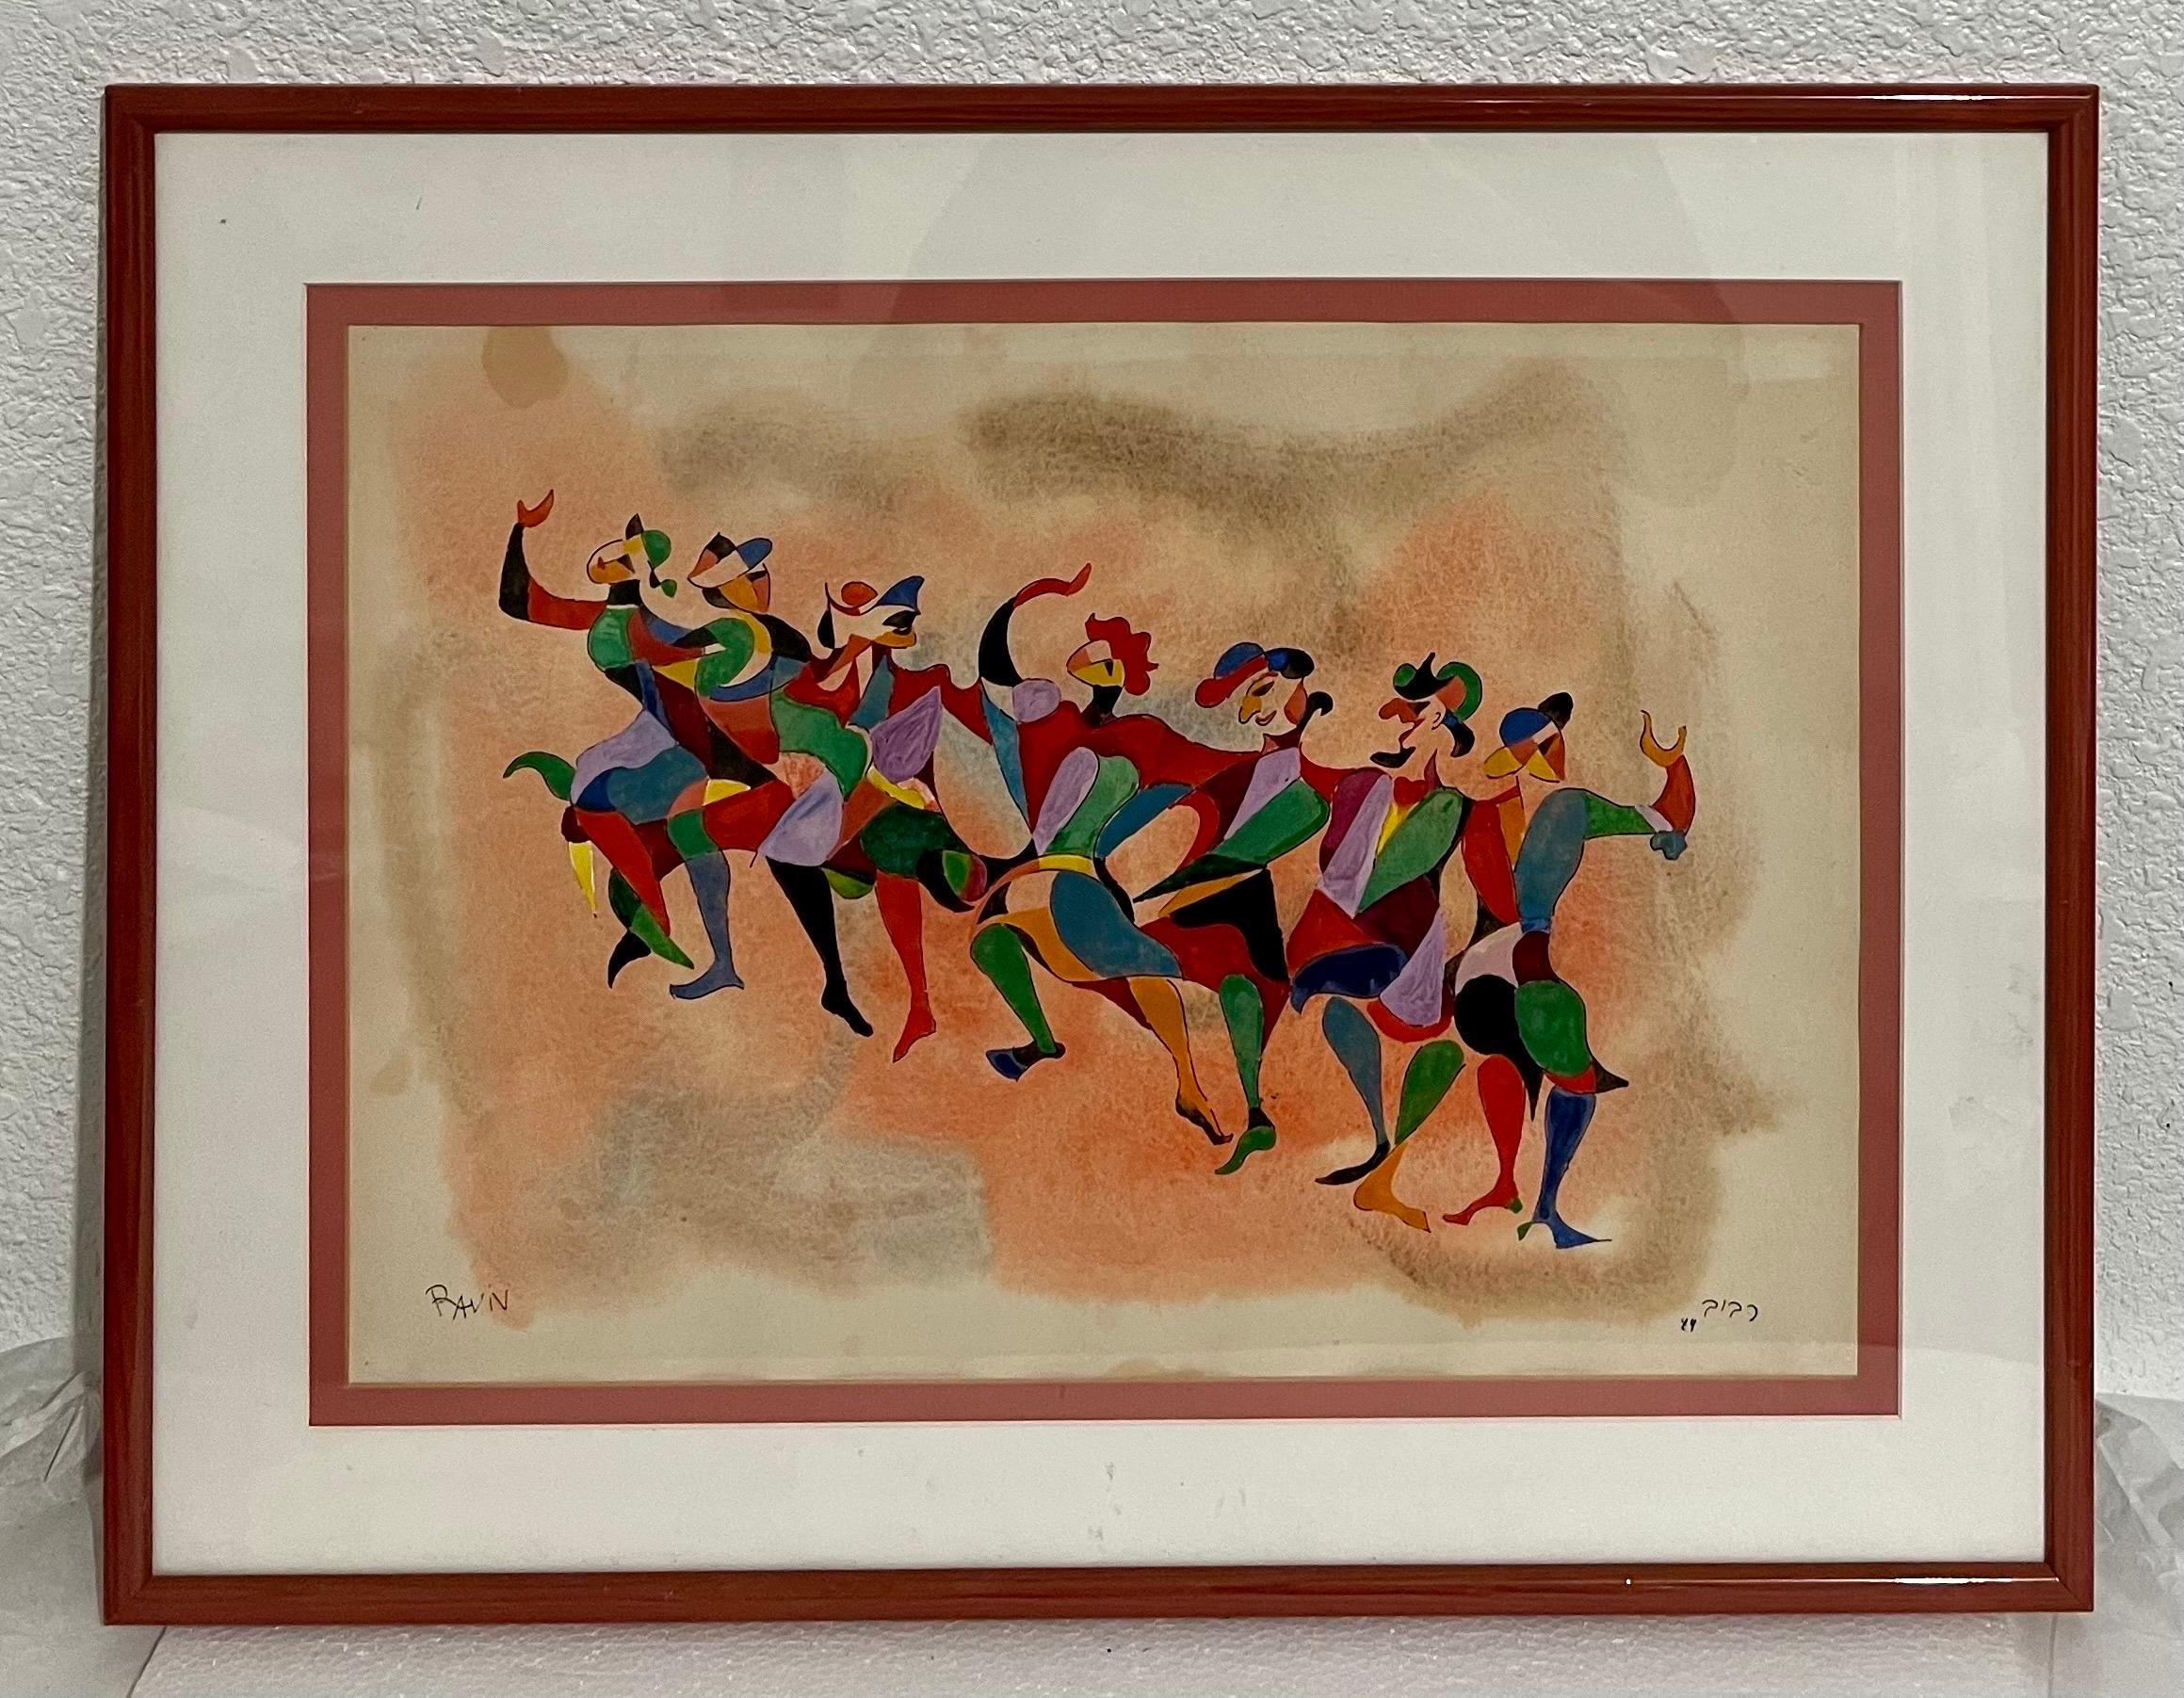 Dancing Jesters or Clowns (colorful Chassidim dancing)
Gouache on paper
Sheet is 19.25 X 25.25  
Image is 13.5 X 19.25

Moshé Raviv-Vorobeichic, known as Moi Ver, born Moses Vorobeichik (1904–1995) was an Israeli photographer and painter.

Moi Ver